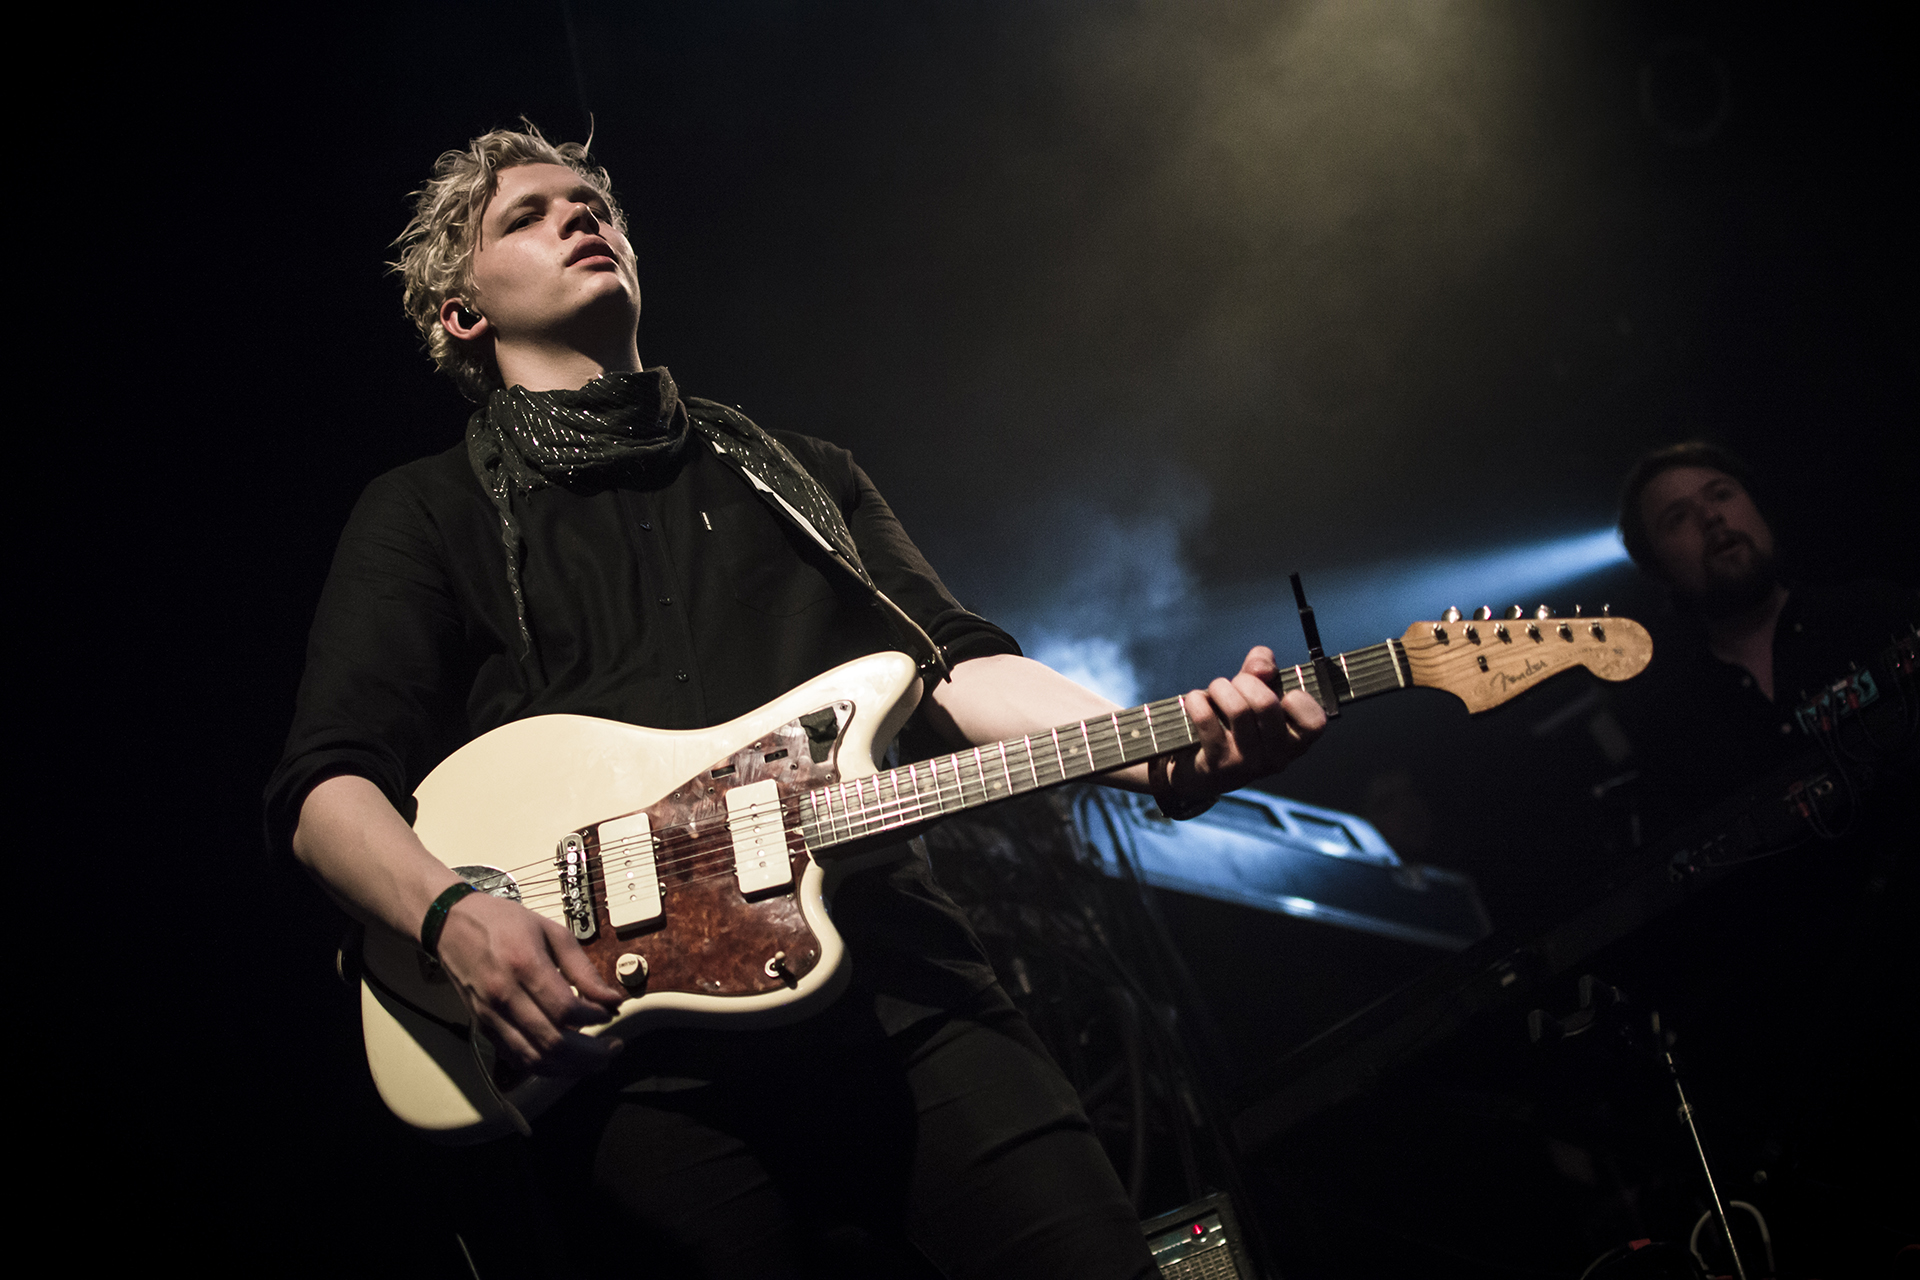 Of-Monsters-And-Men-Niceto-Club-16-Marzo-2016-Lucia-de-la-Torre-Indie-Hoy-7